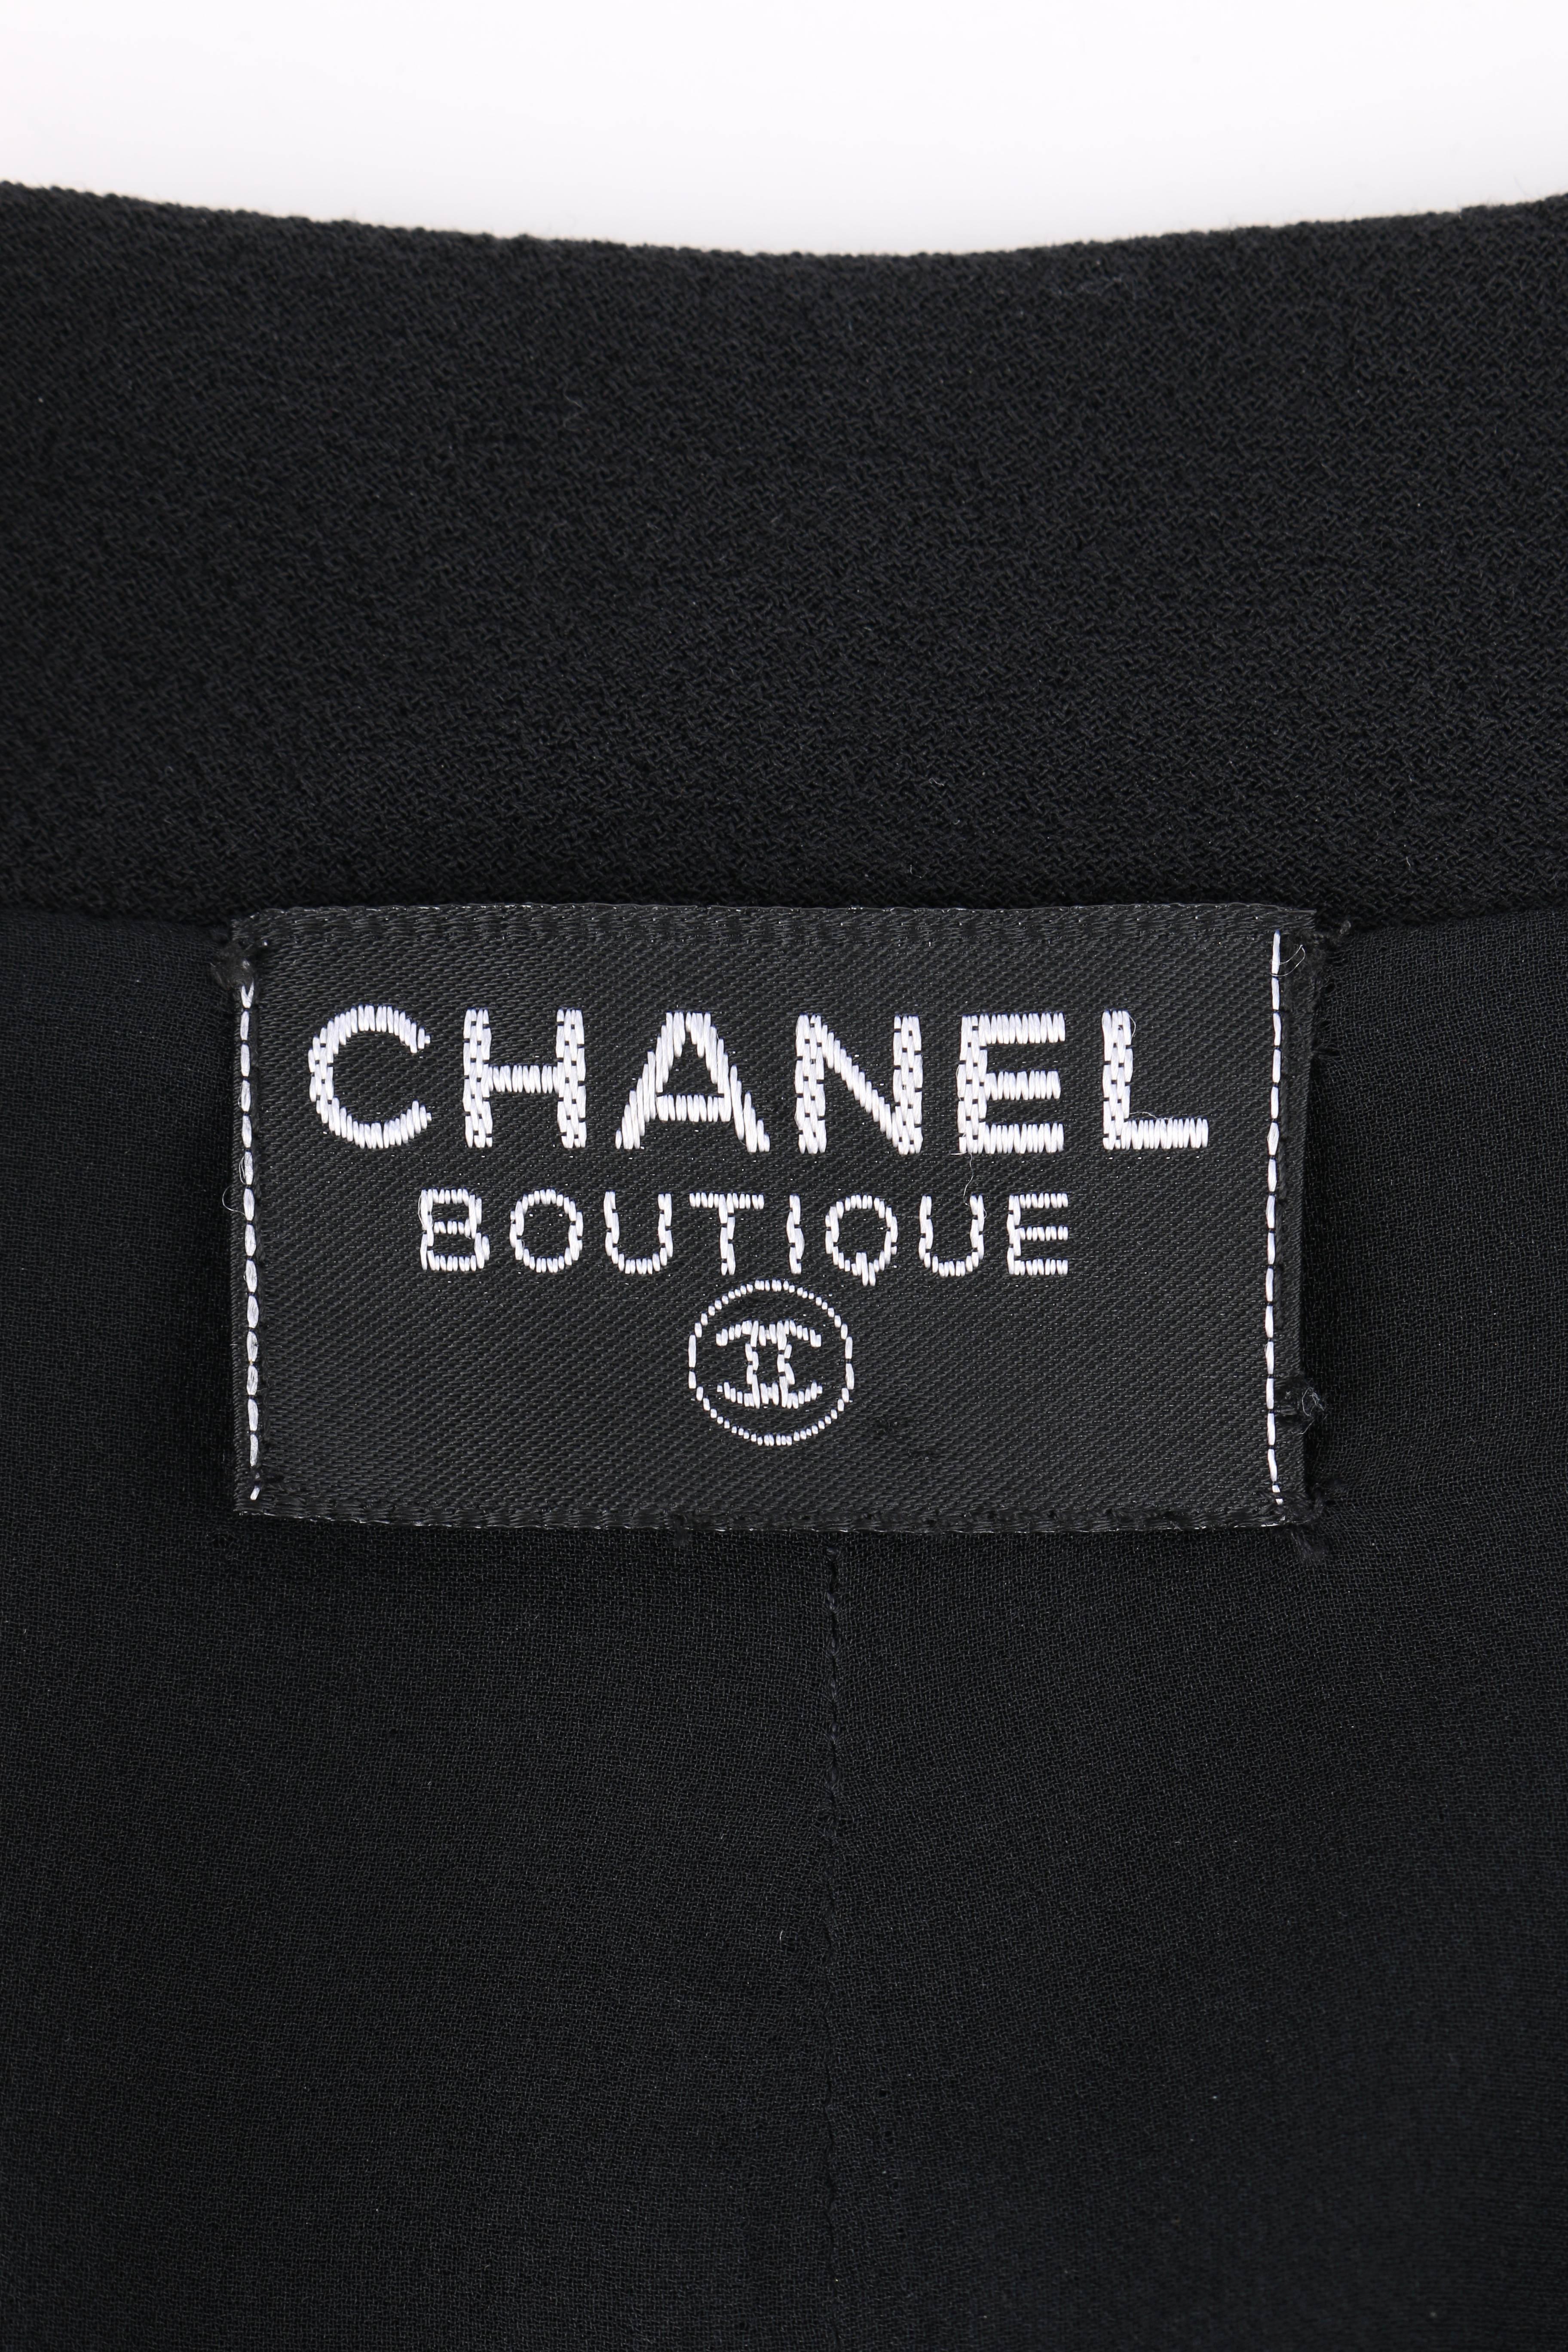 CHANEL Boutique c.1980's Black Wool Crepe Double Breasted One Piece Dress Suit 3